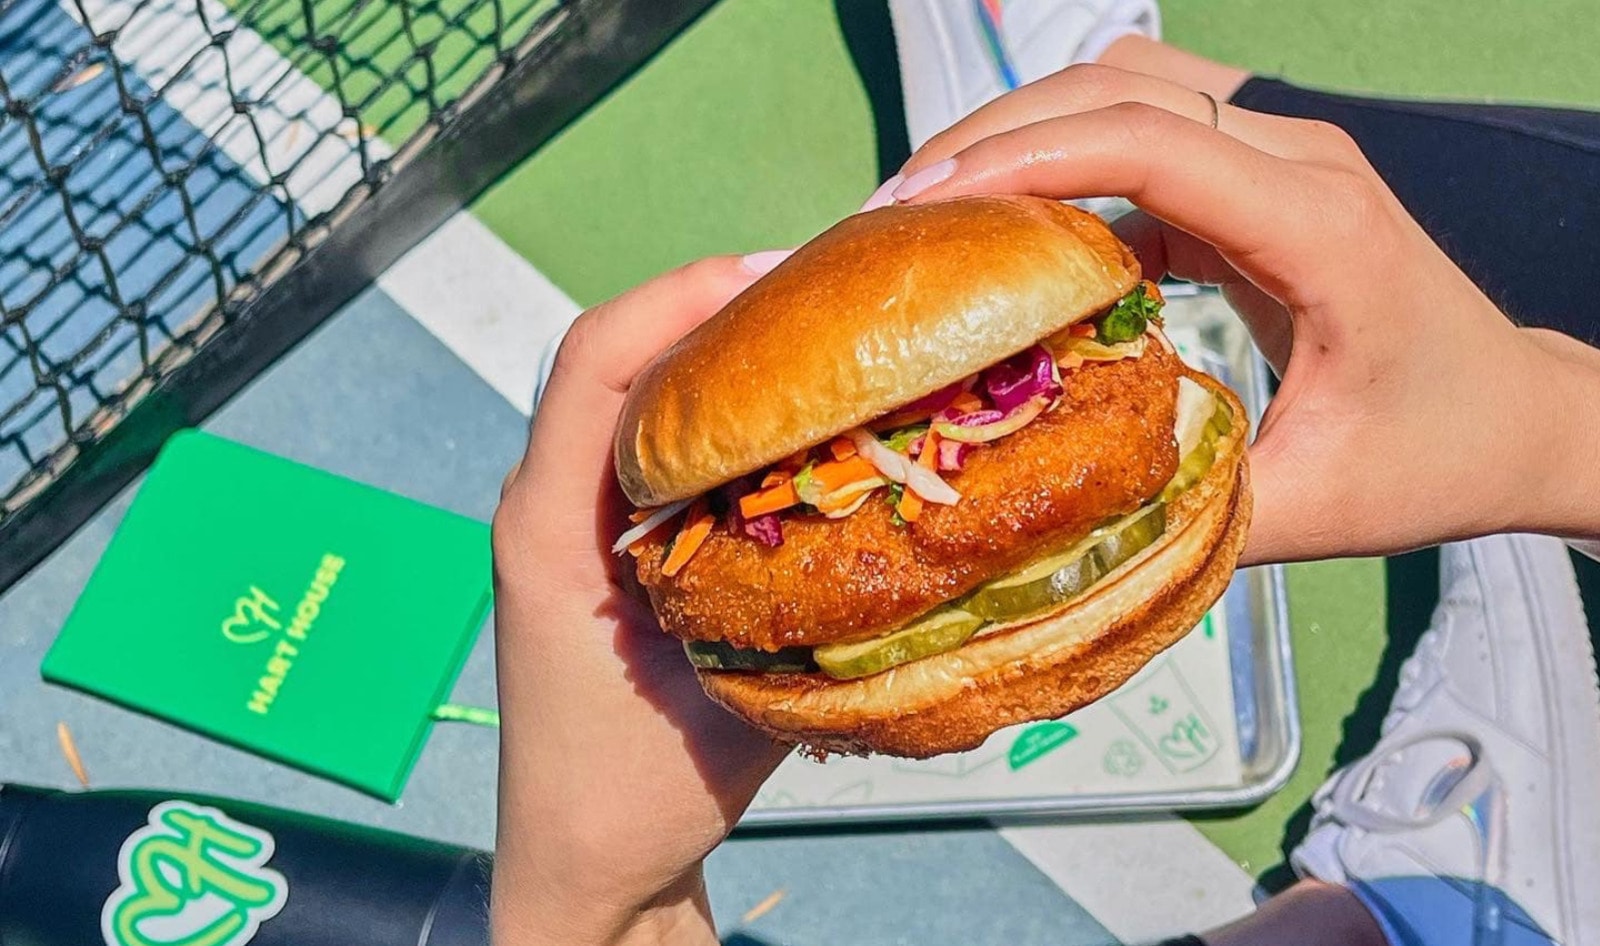 19 Vegan Fried Chicken Sandwiches That Are Better Than Chick-fil-A and Popeyes